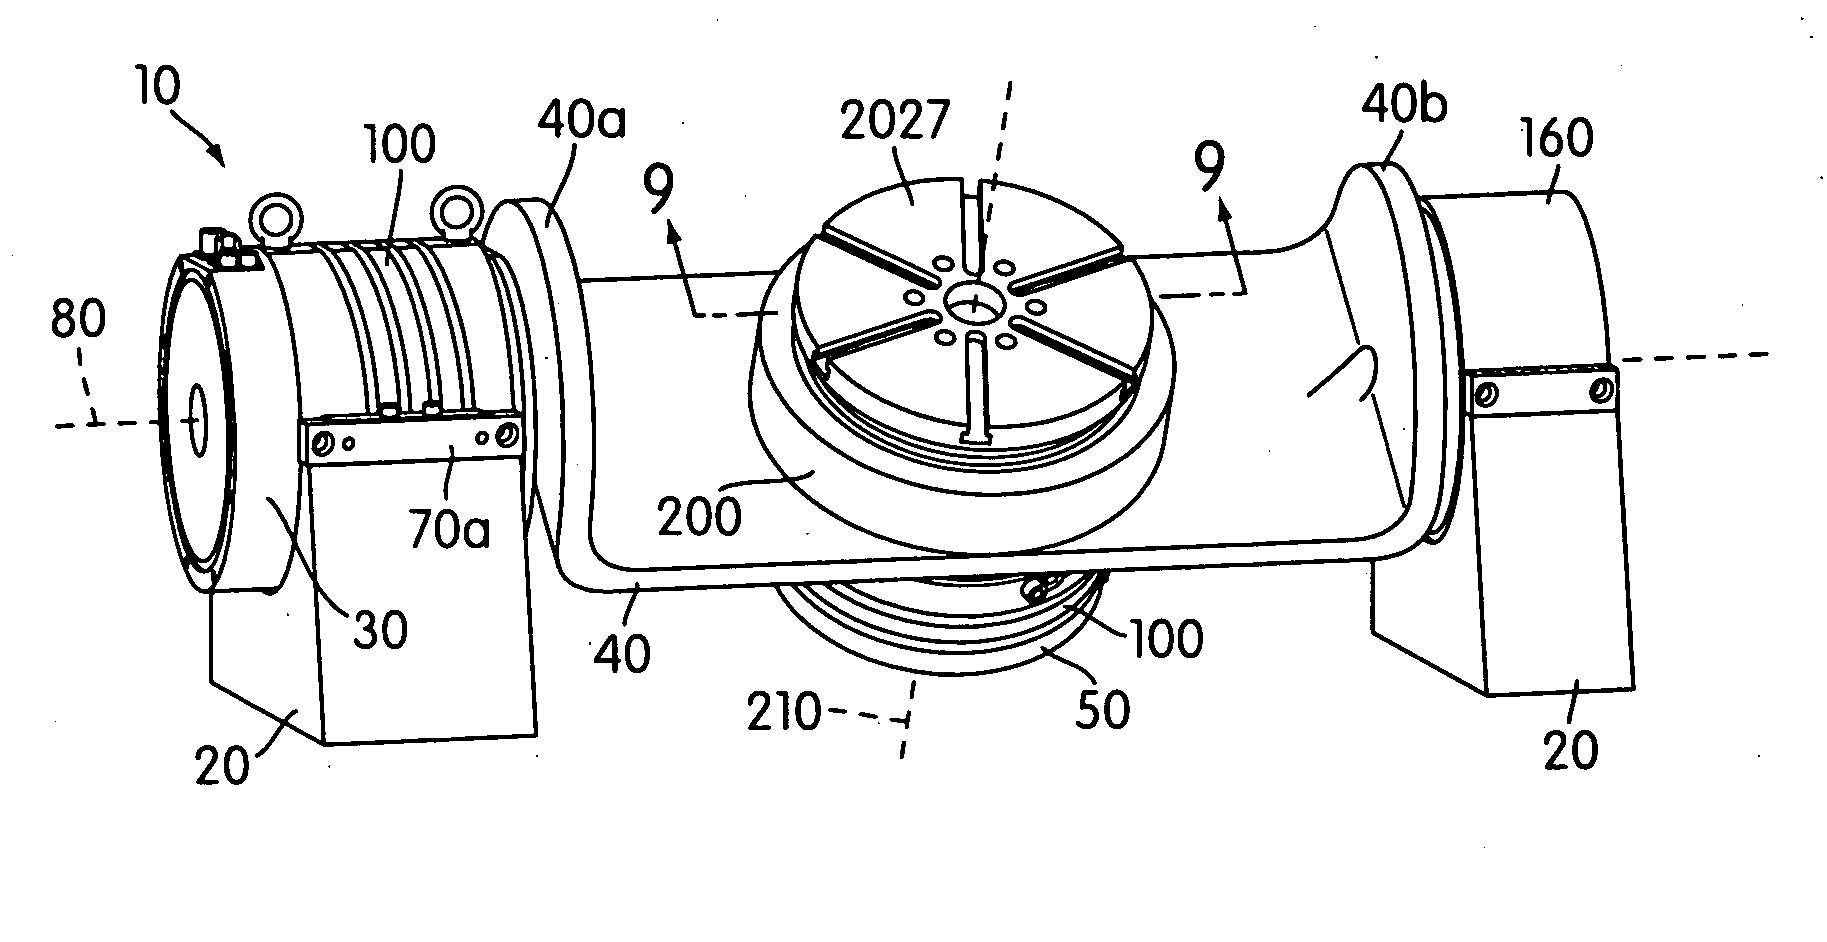 Rotary table with frameless motor